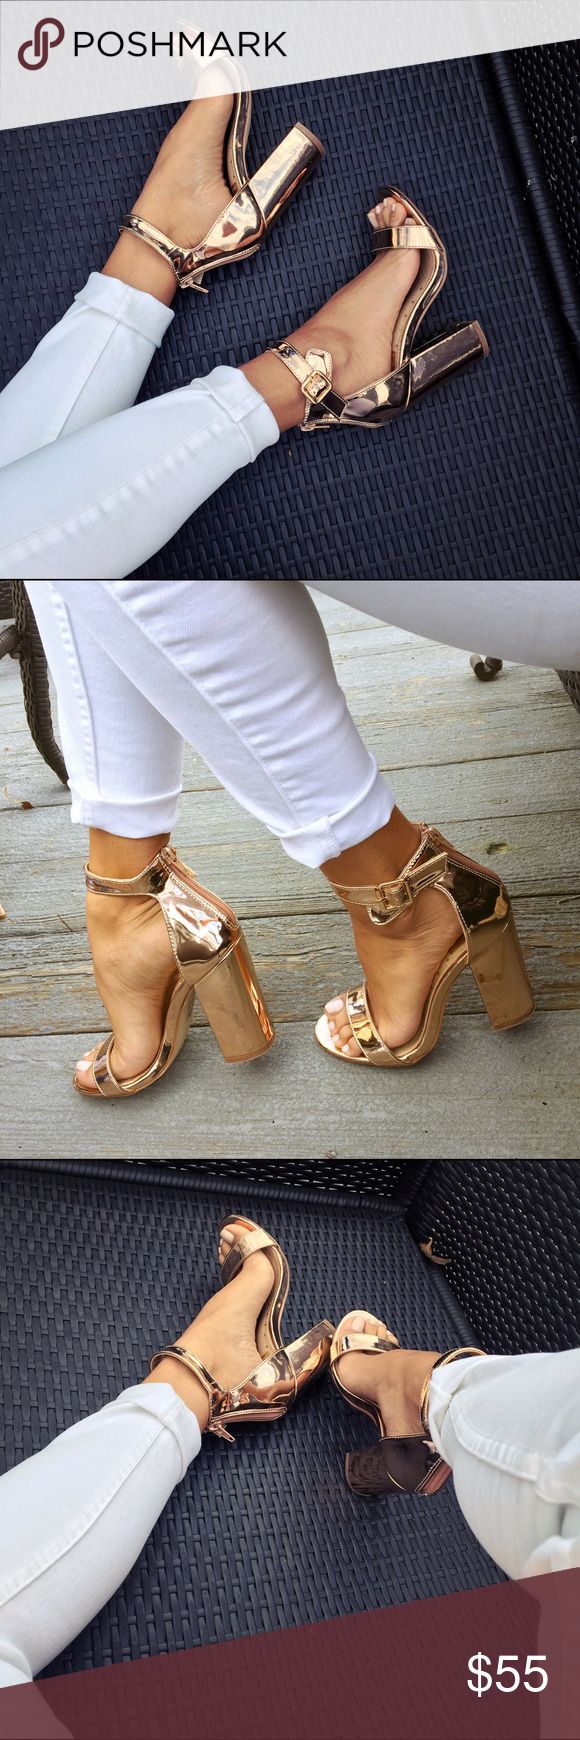 Rose gold metallic chunky heels Worn once for my engagement photos, super cute! ...